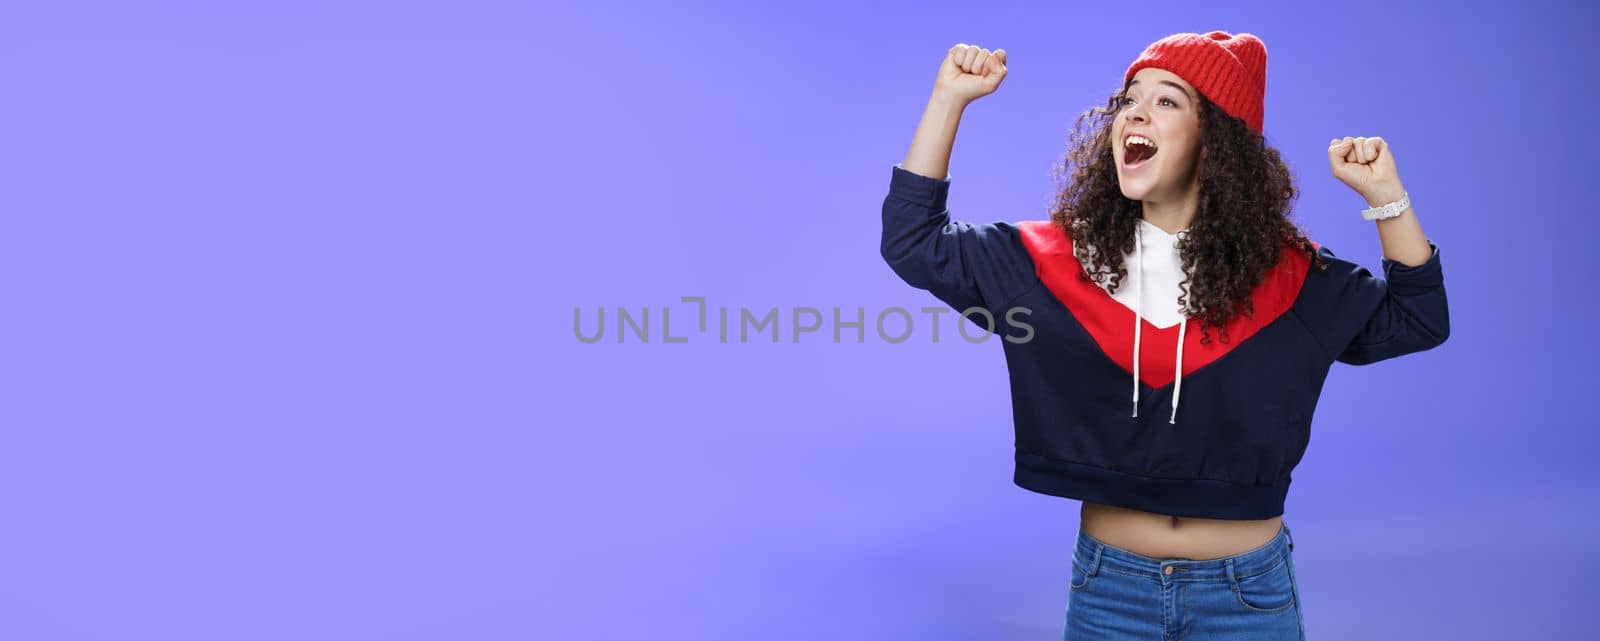 Happy playful and carefree woman yelling out loud tell world great news looking left amused and delighted as shouting positive words raising hands in triumph, cheering for team, wearing hat by Benzoix